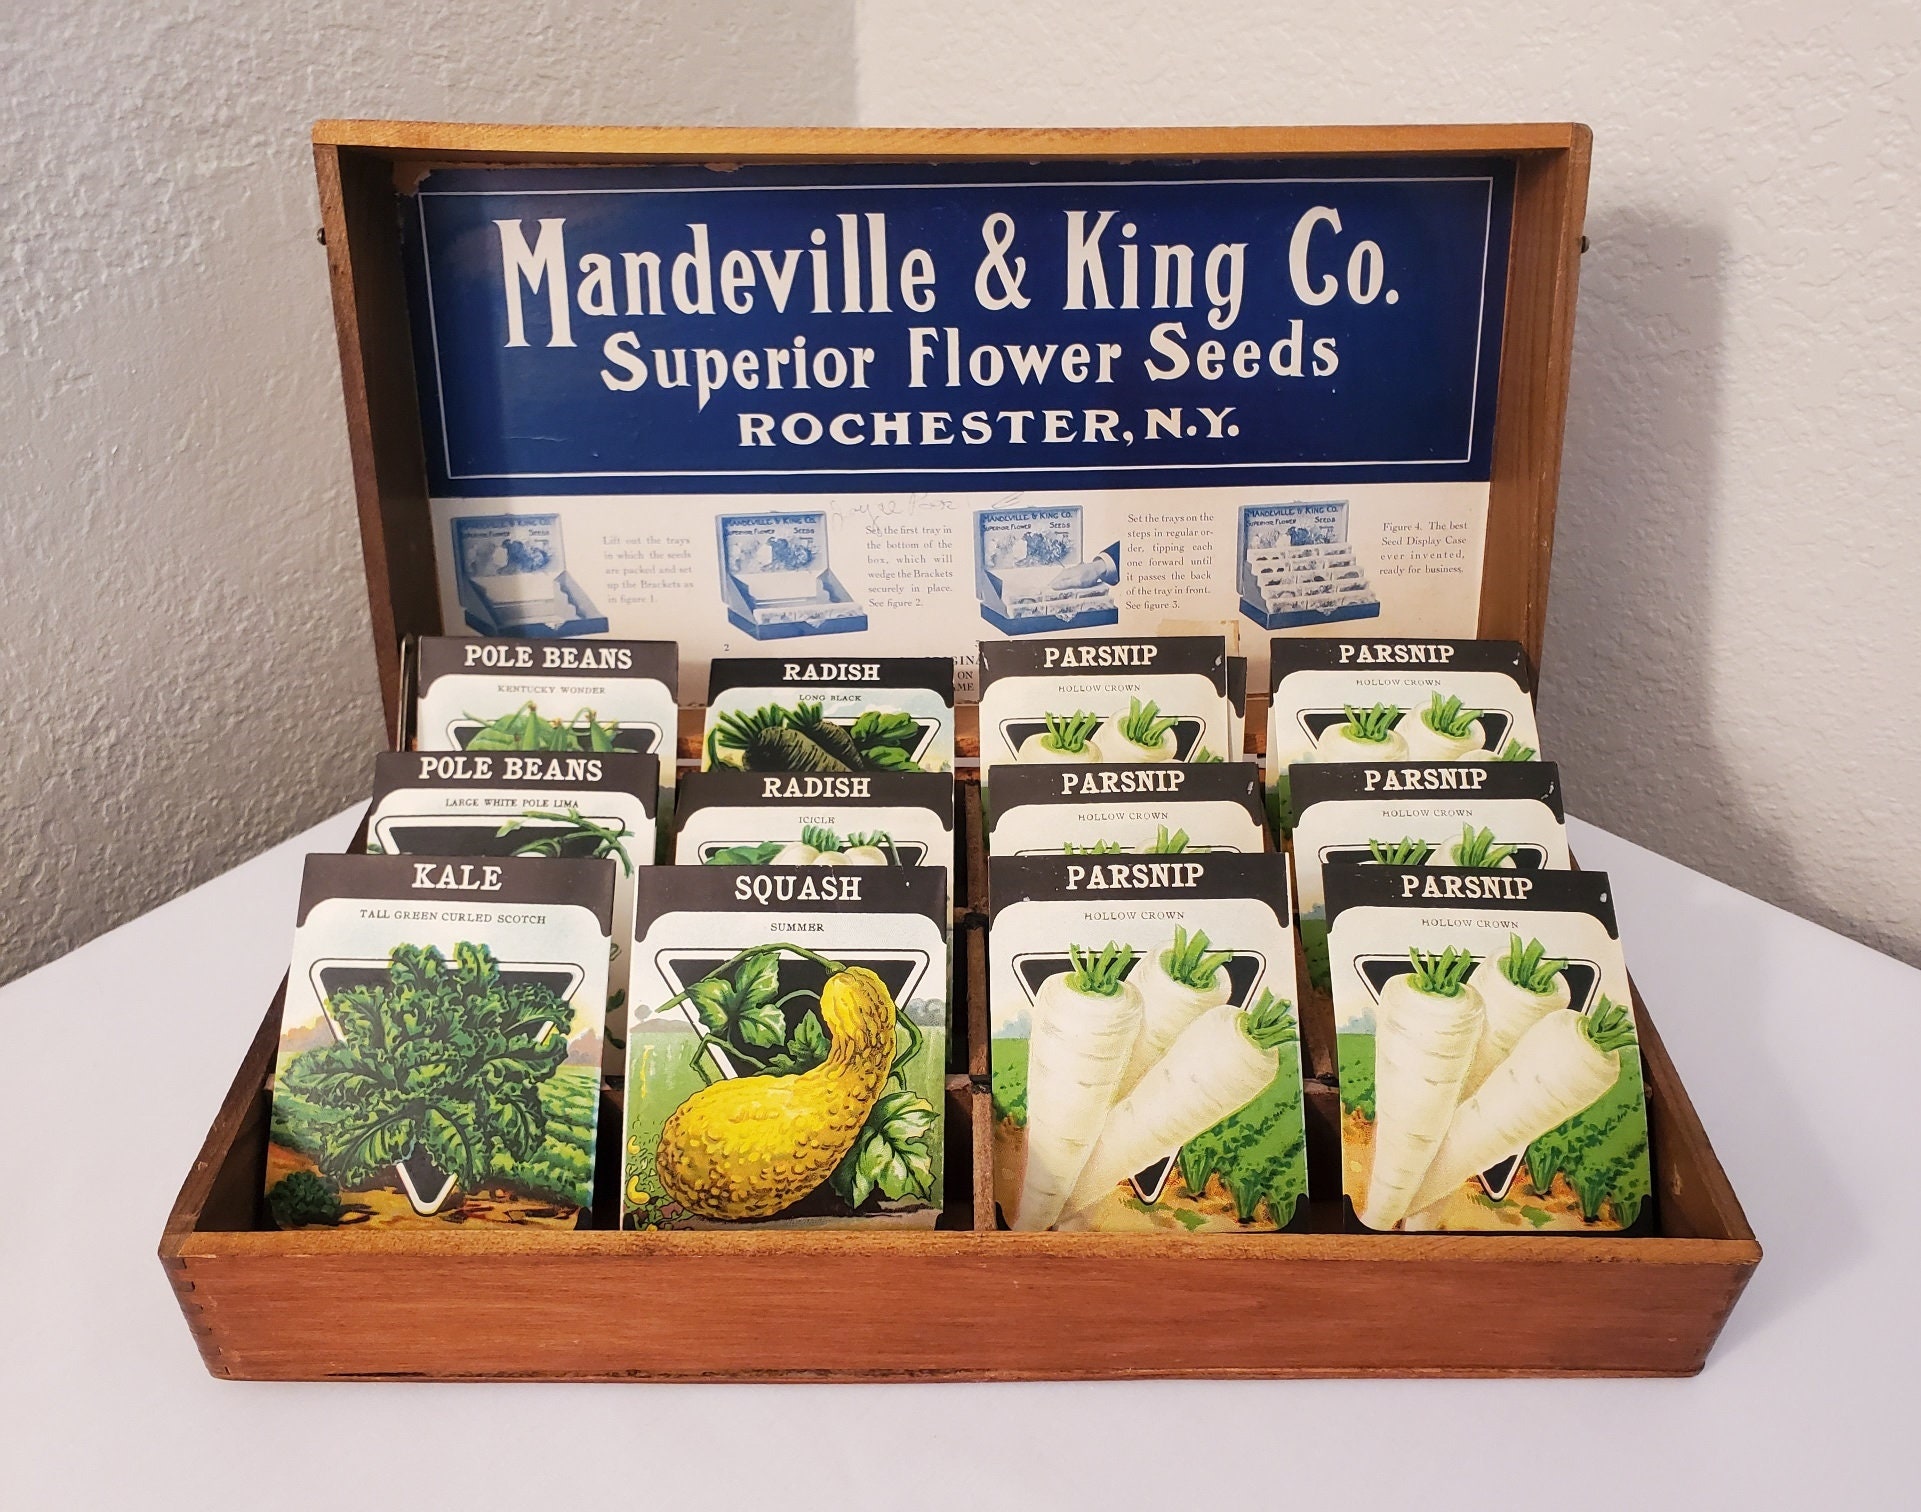 Mandeville & KING Co. Old Vintage FLOWER SEED BOX – TheBoxSF